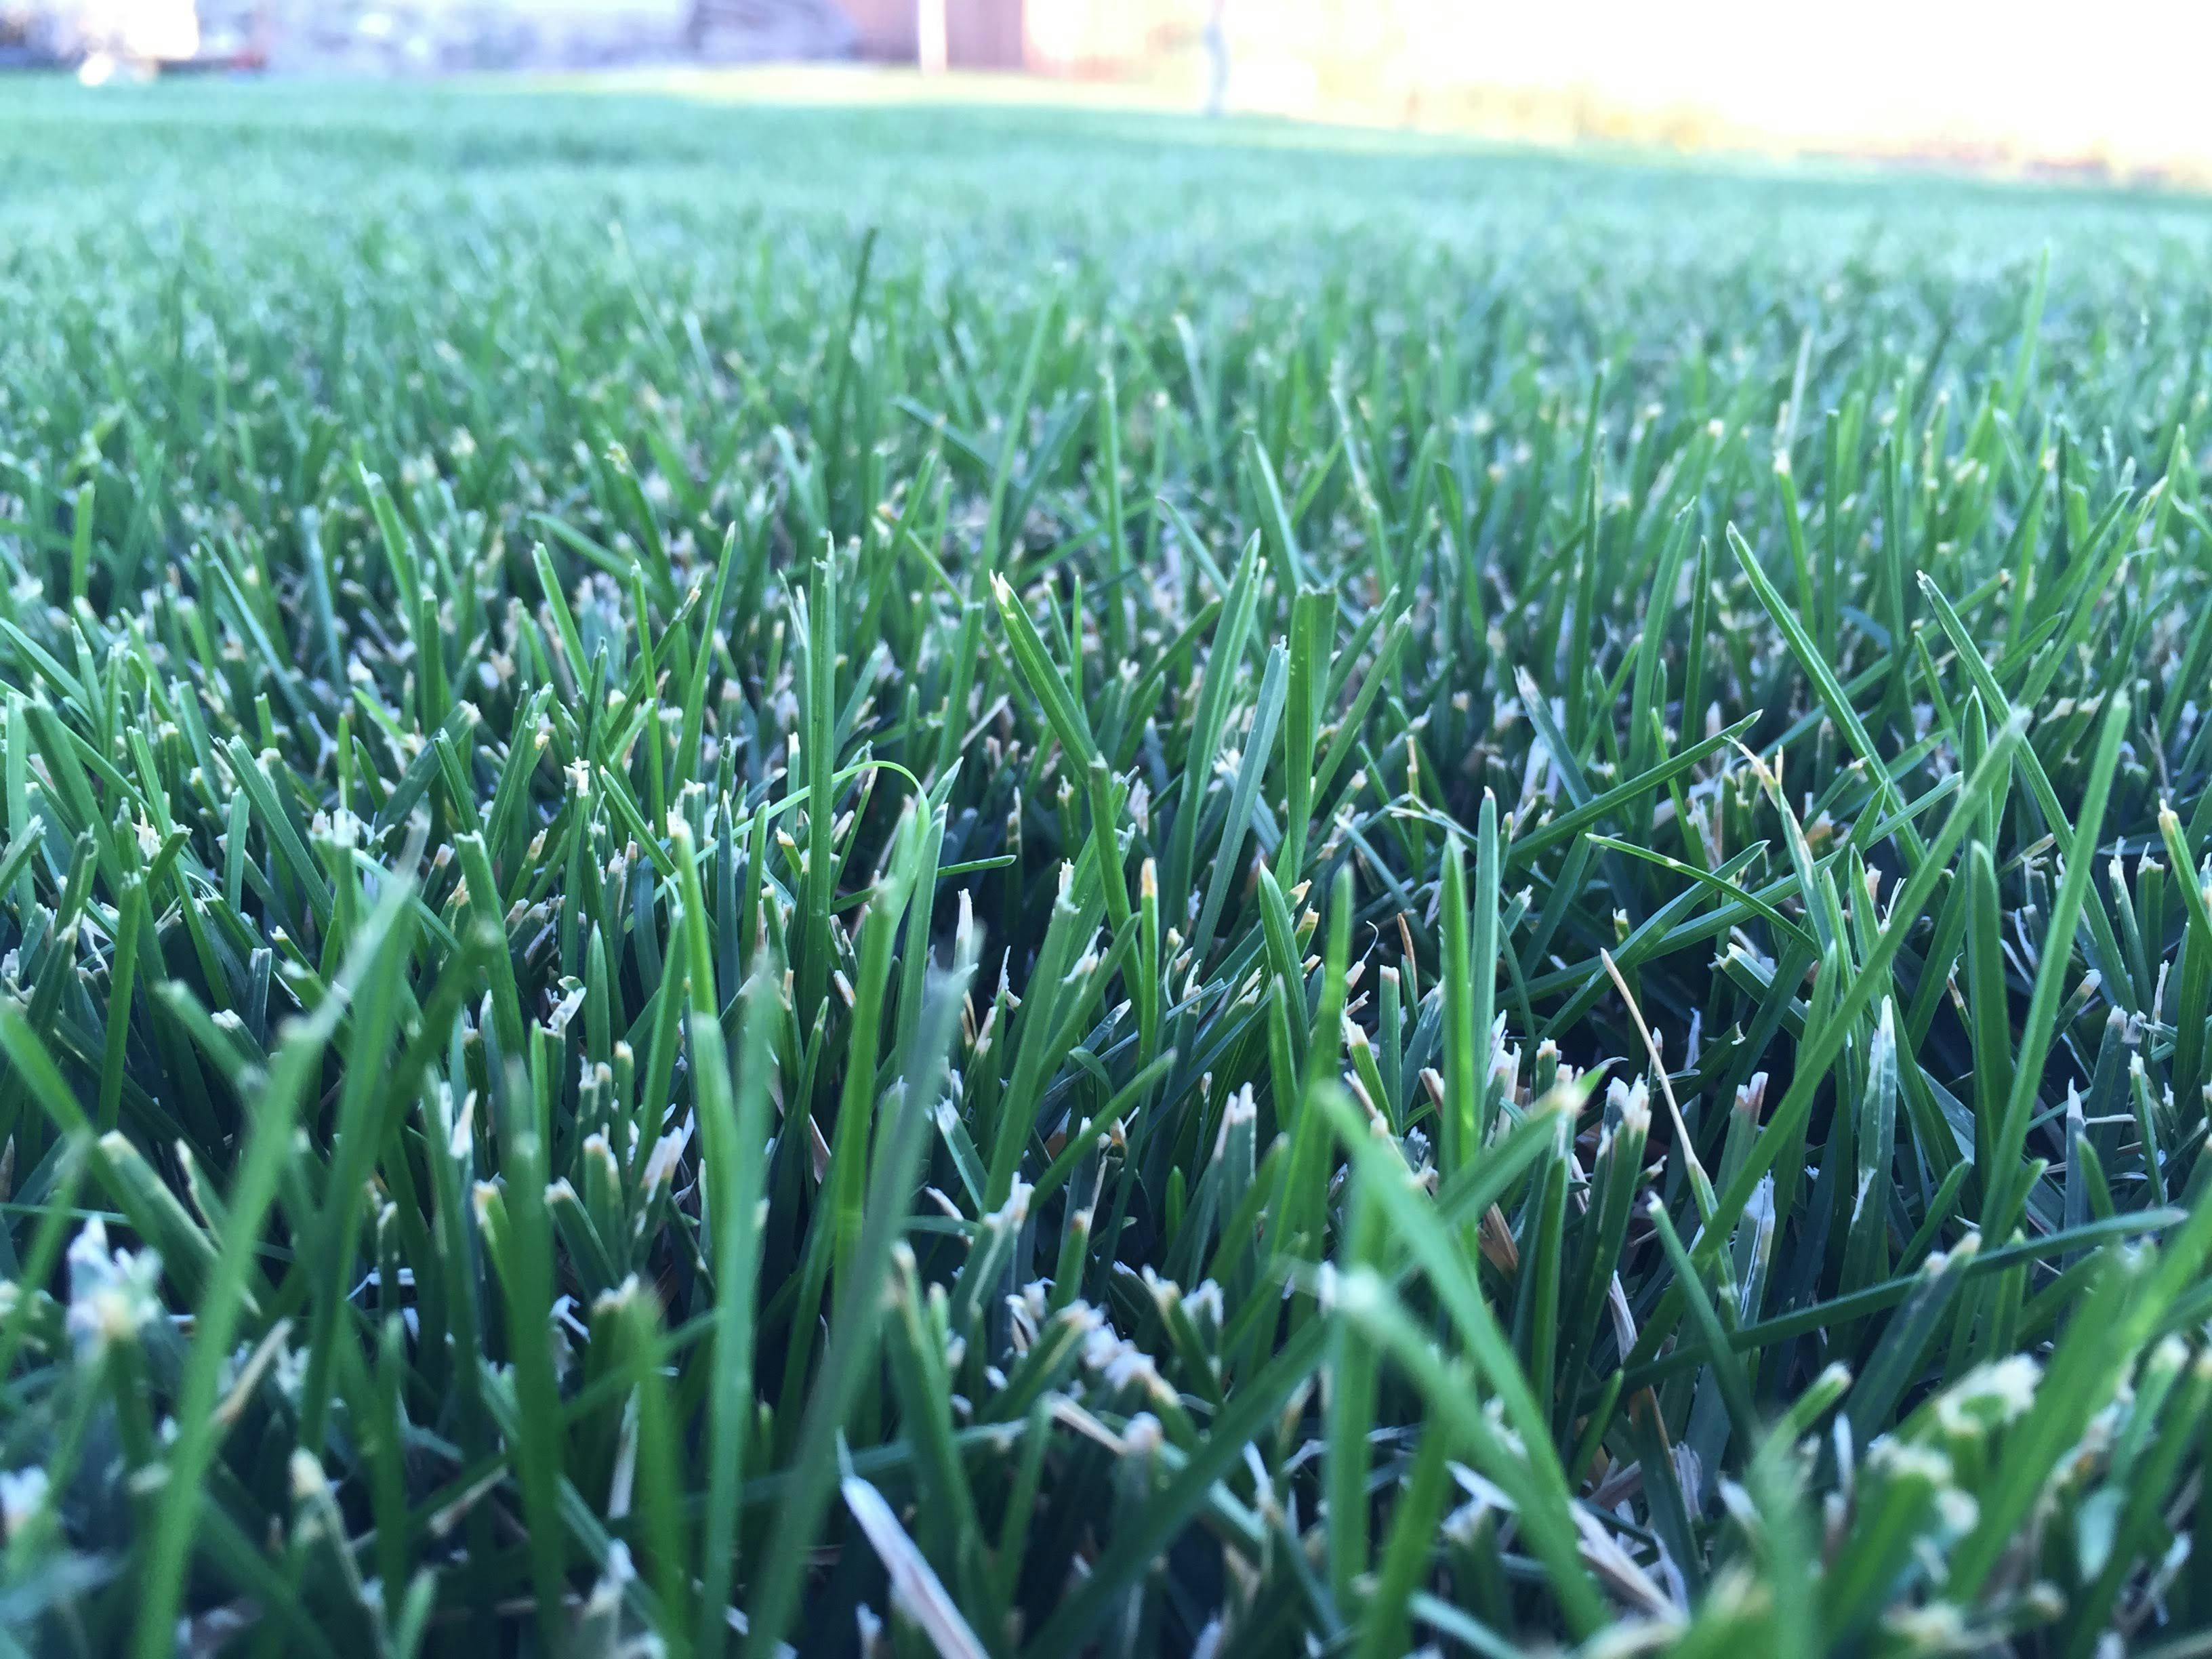 Close-up image of freshly cut green grass blades, showcasing their vibrant texture and color.